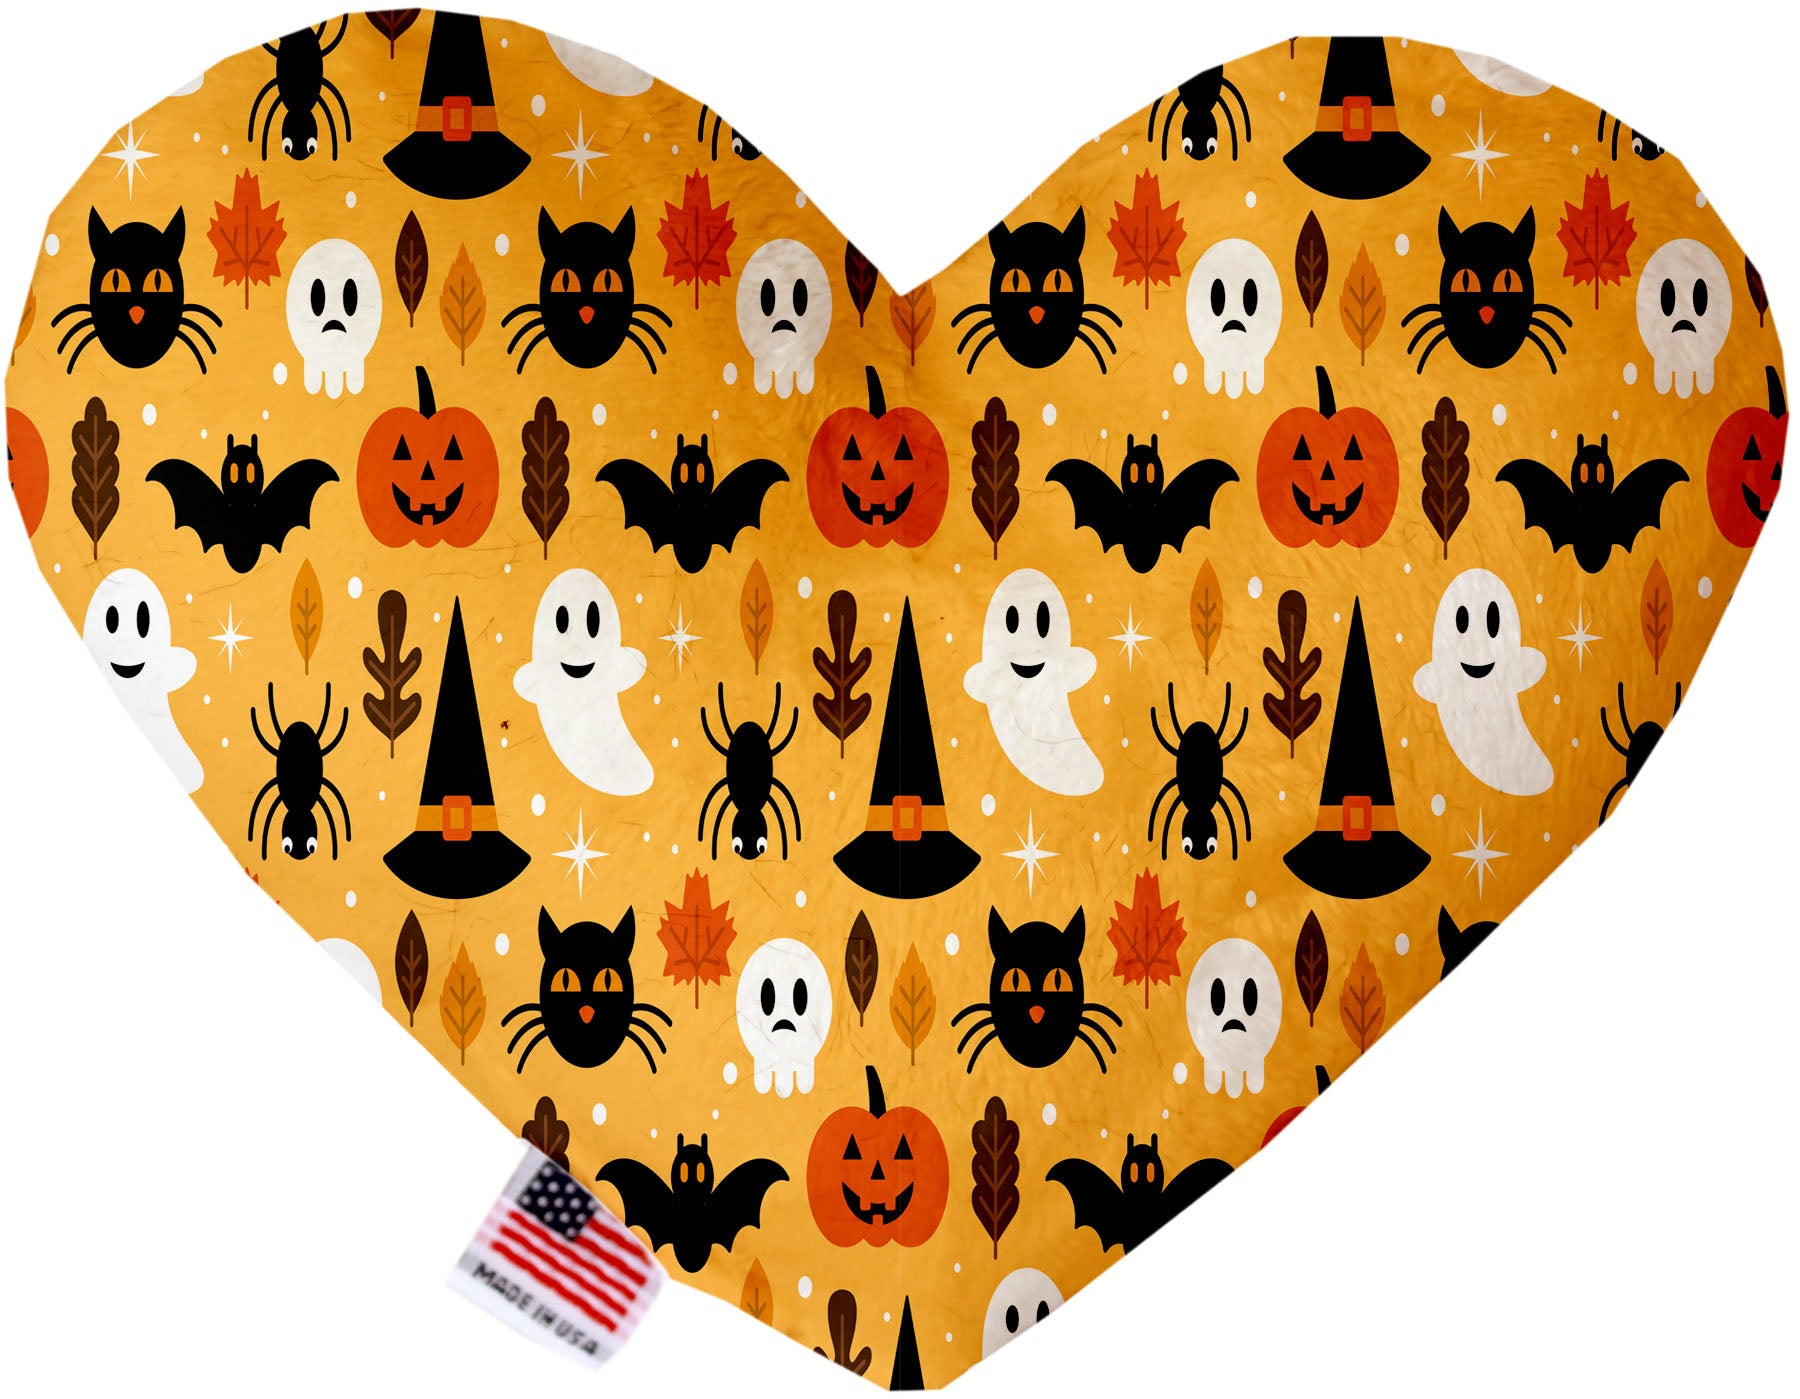 Happy Halloween Stuffing Free Dog Toys - staygoldendoodle.com